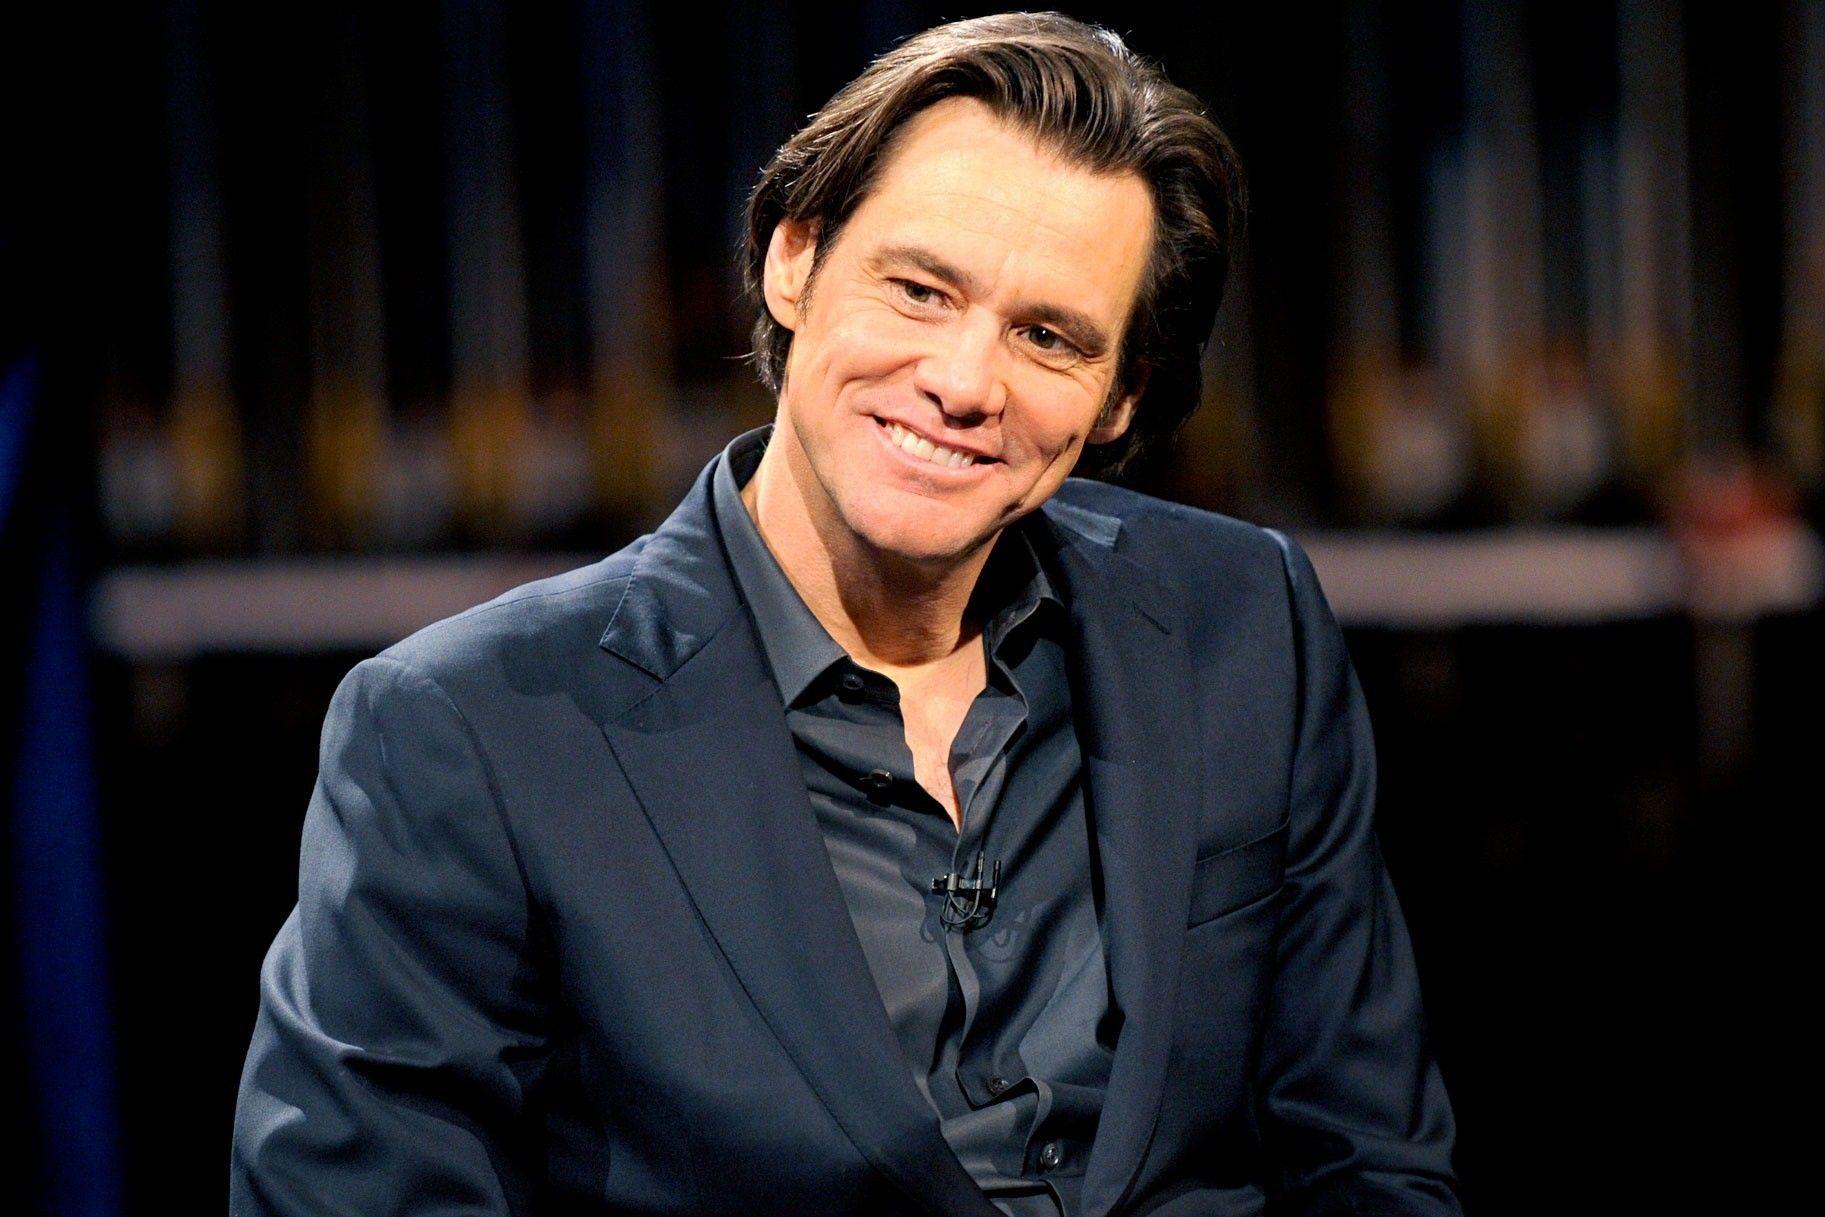 Jim Carrey Wallpaper High Resolution and Quality Download